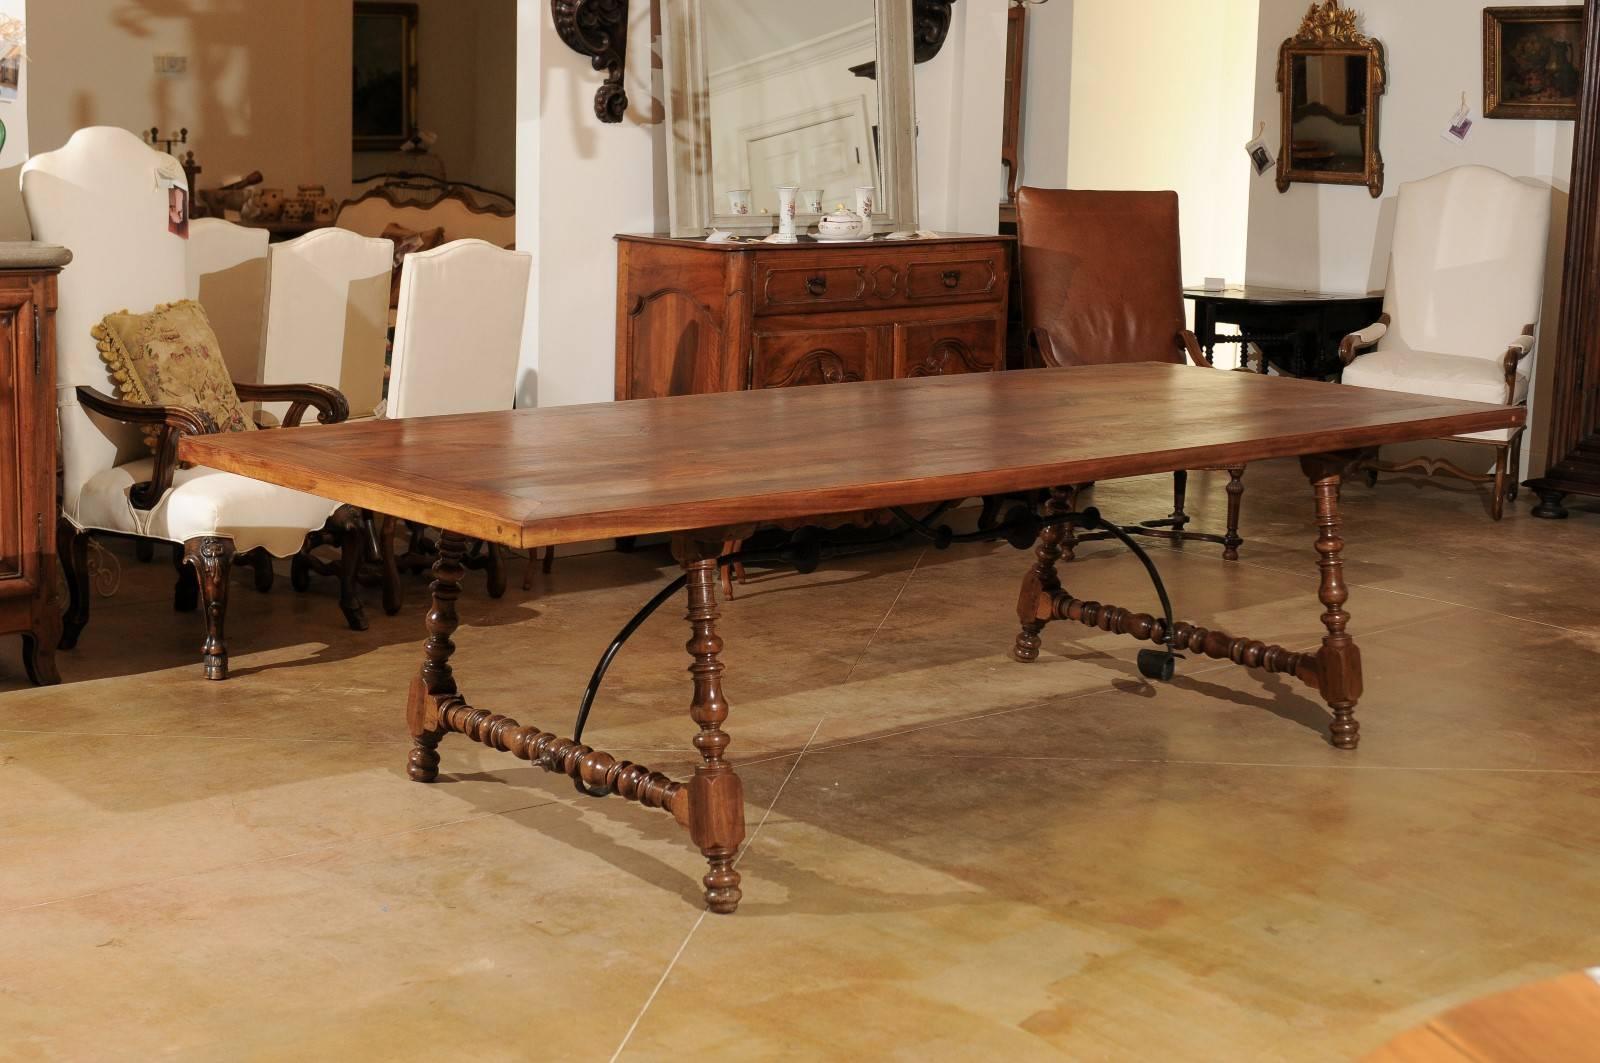 This exquisite Spanish Fratino table from the 18th century is made of walnut and features a long rectangular top over a beautifully turned base. Each side shows slightly splayed legs, connected two by two with a side stretcher. A hand-forged iron